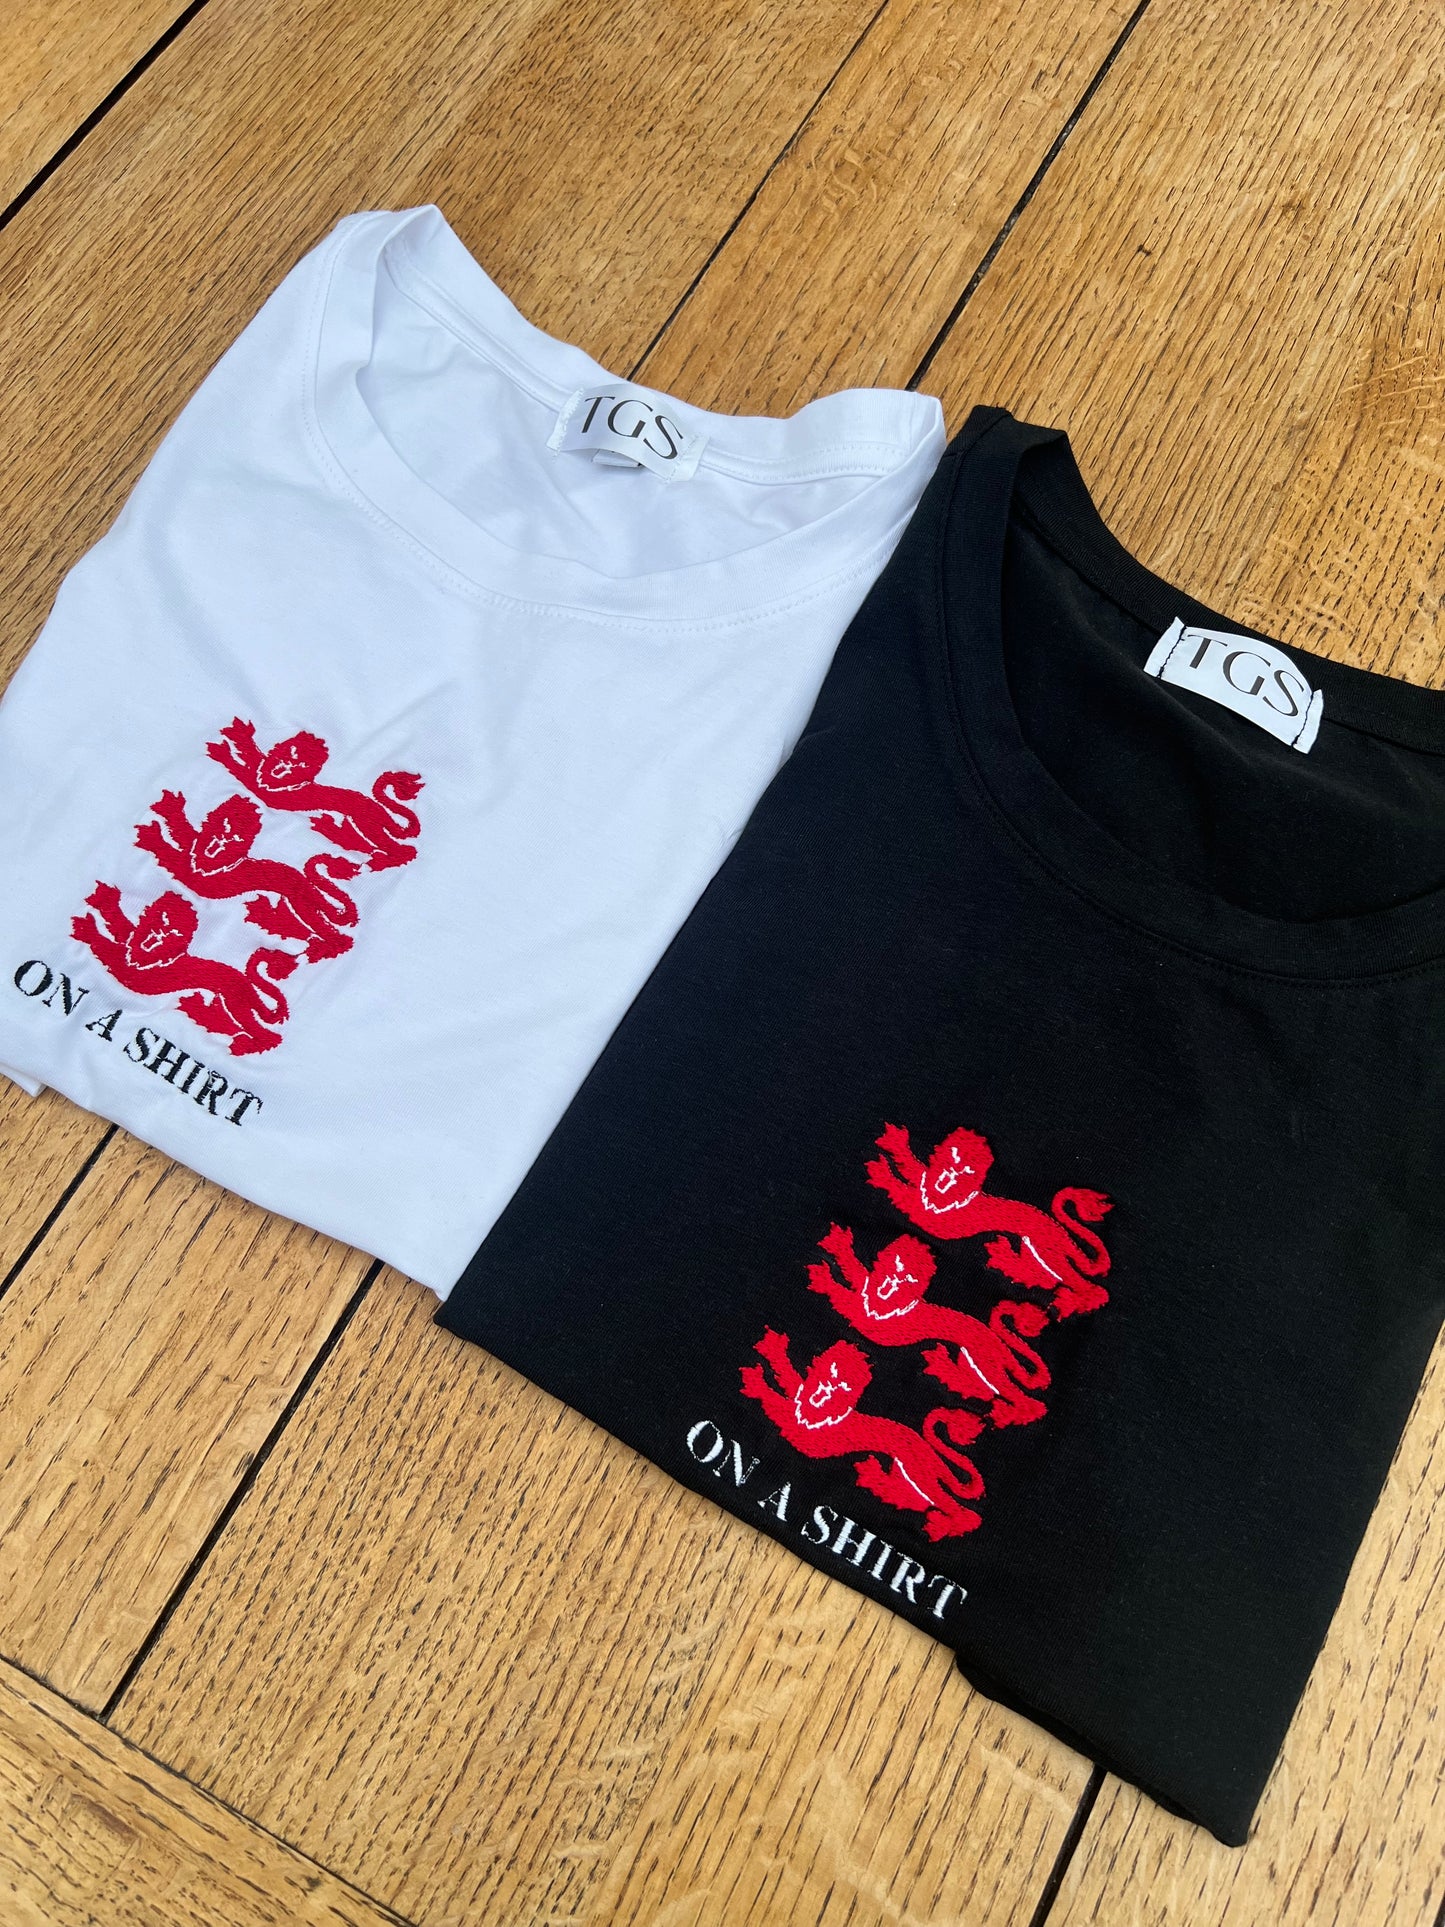 3 Lions On A Shirt Baby Tee